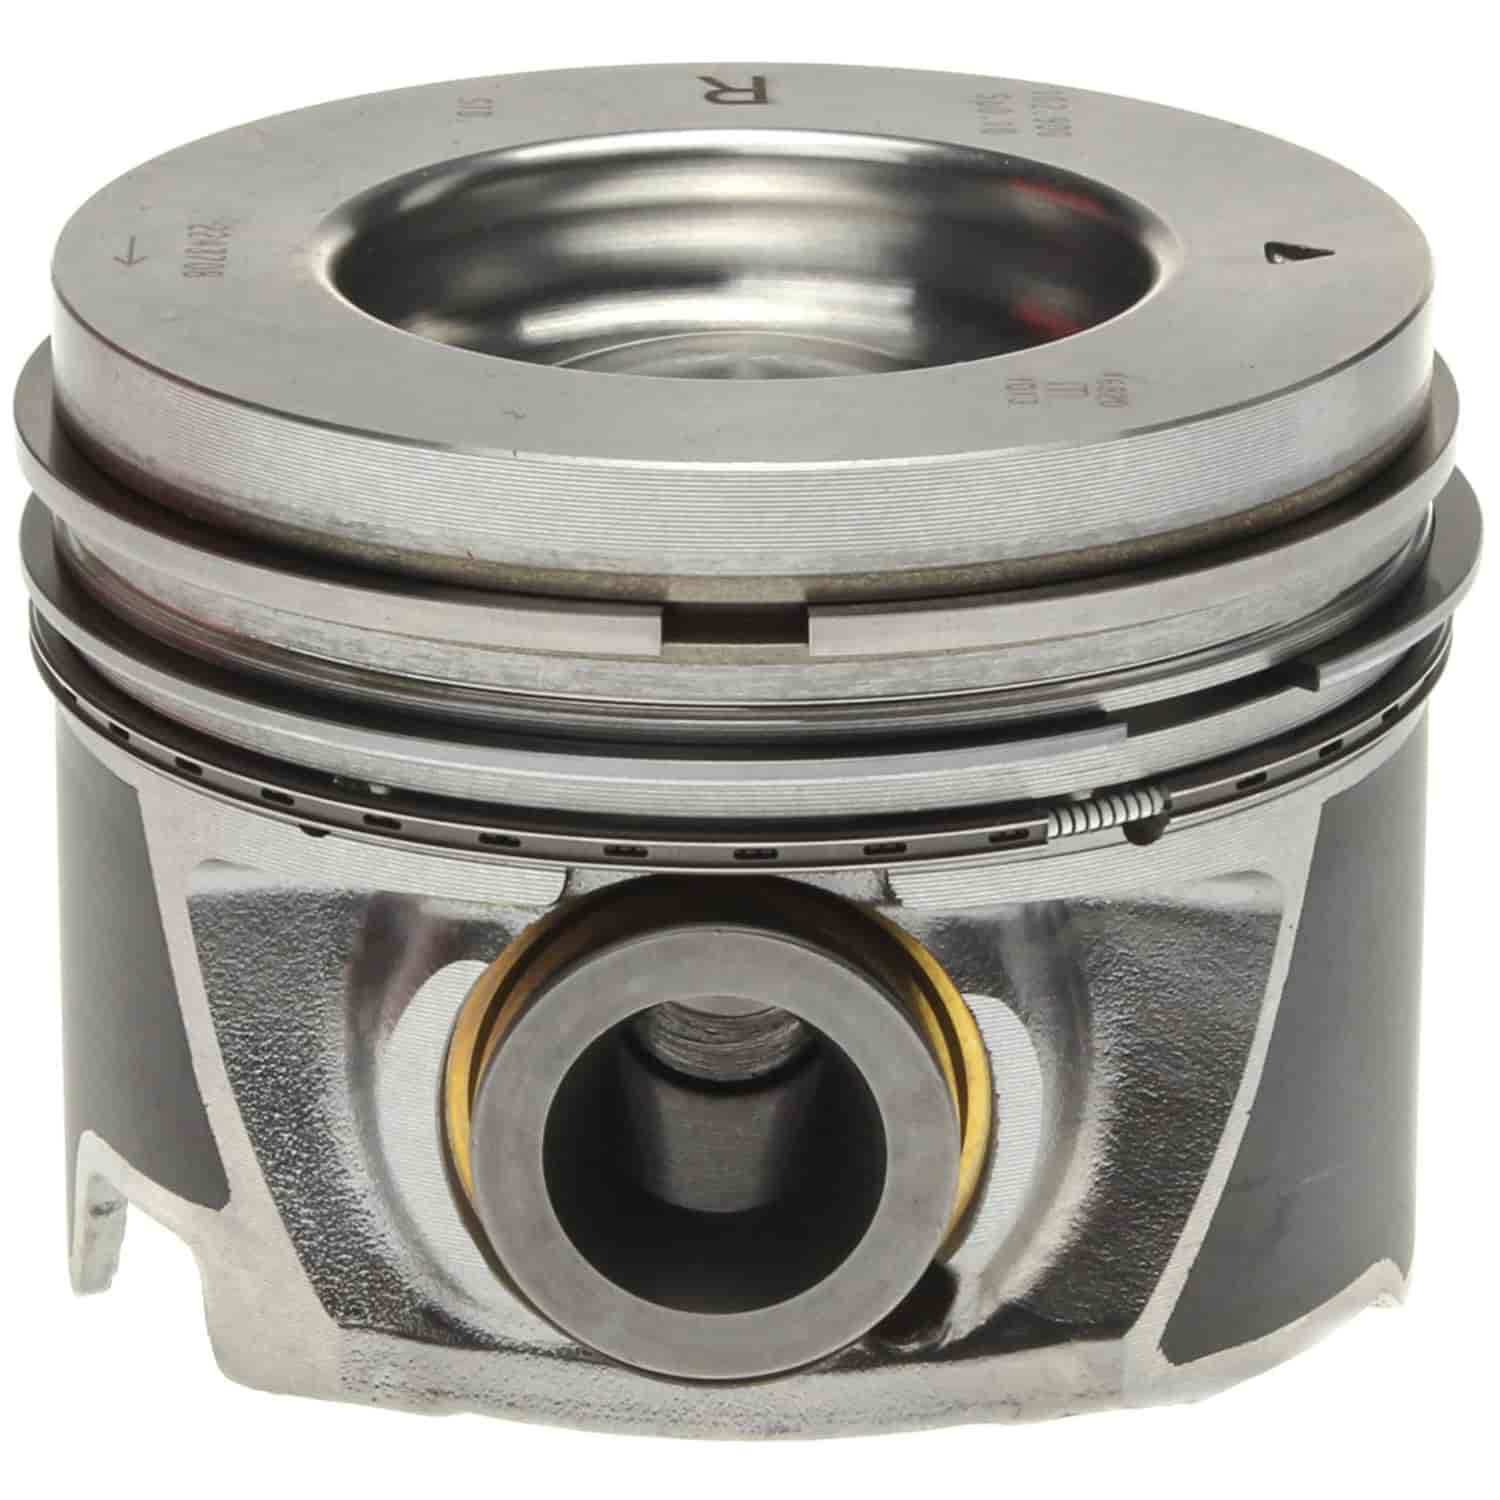 Piston and Rings Set 2006-2010 Chevy/GMC Duramax Diesel V8 6.6L Right Bank with 4.085" Bore (+.030")